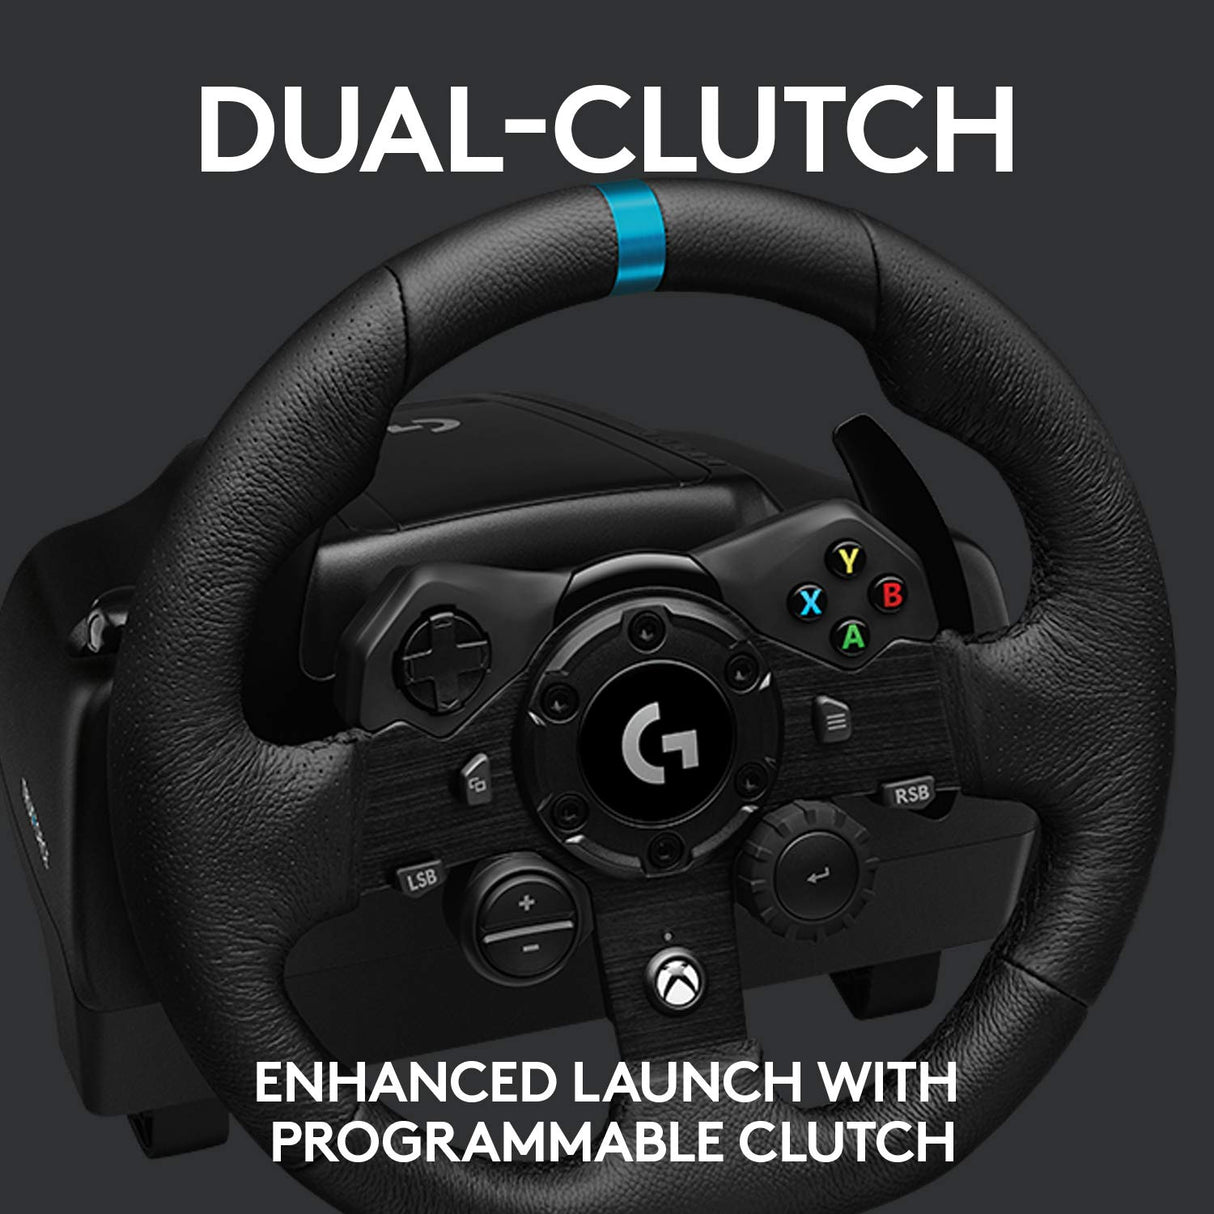 Logitech G923 Racing Wheel and Pedals for Xbox X|S, Xbox One and PC featuring TRUEFORCE up to 1000 Hz Force Feedback, Responsive Pedal, Dual Clutch Launch Control, and Genuine Leather Wheel Cover Xbox|PC Wheel Only